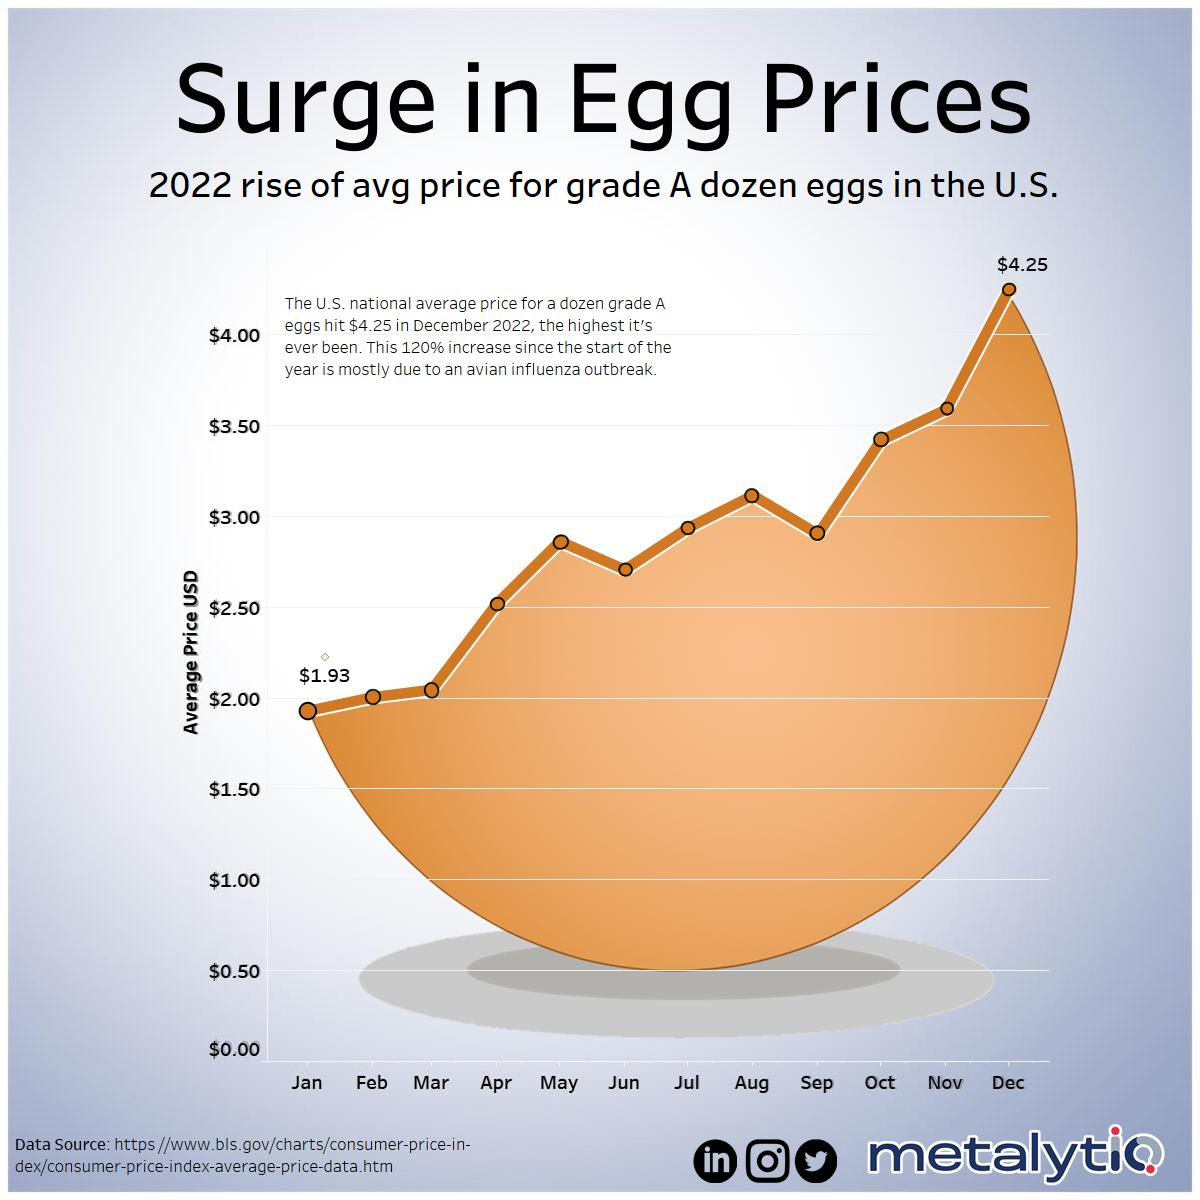 This chart shows the increase in the national average price of a dozen Grade A eggs in the U.S. in 2022